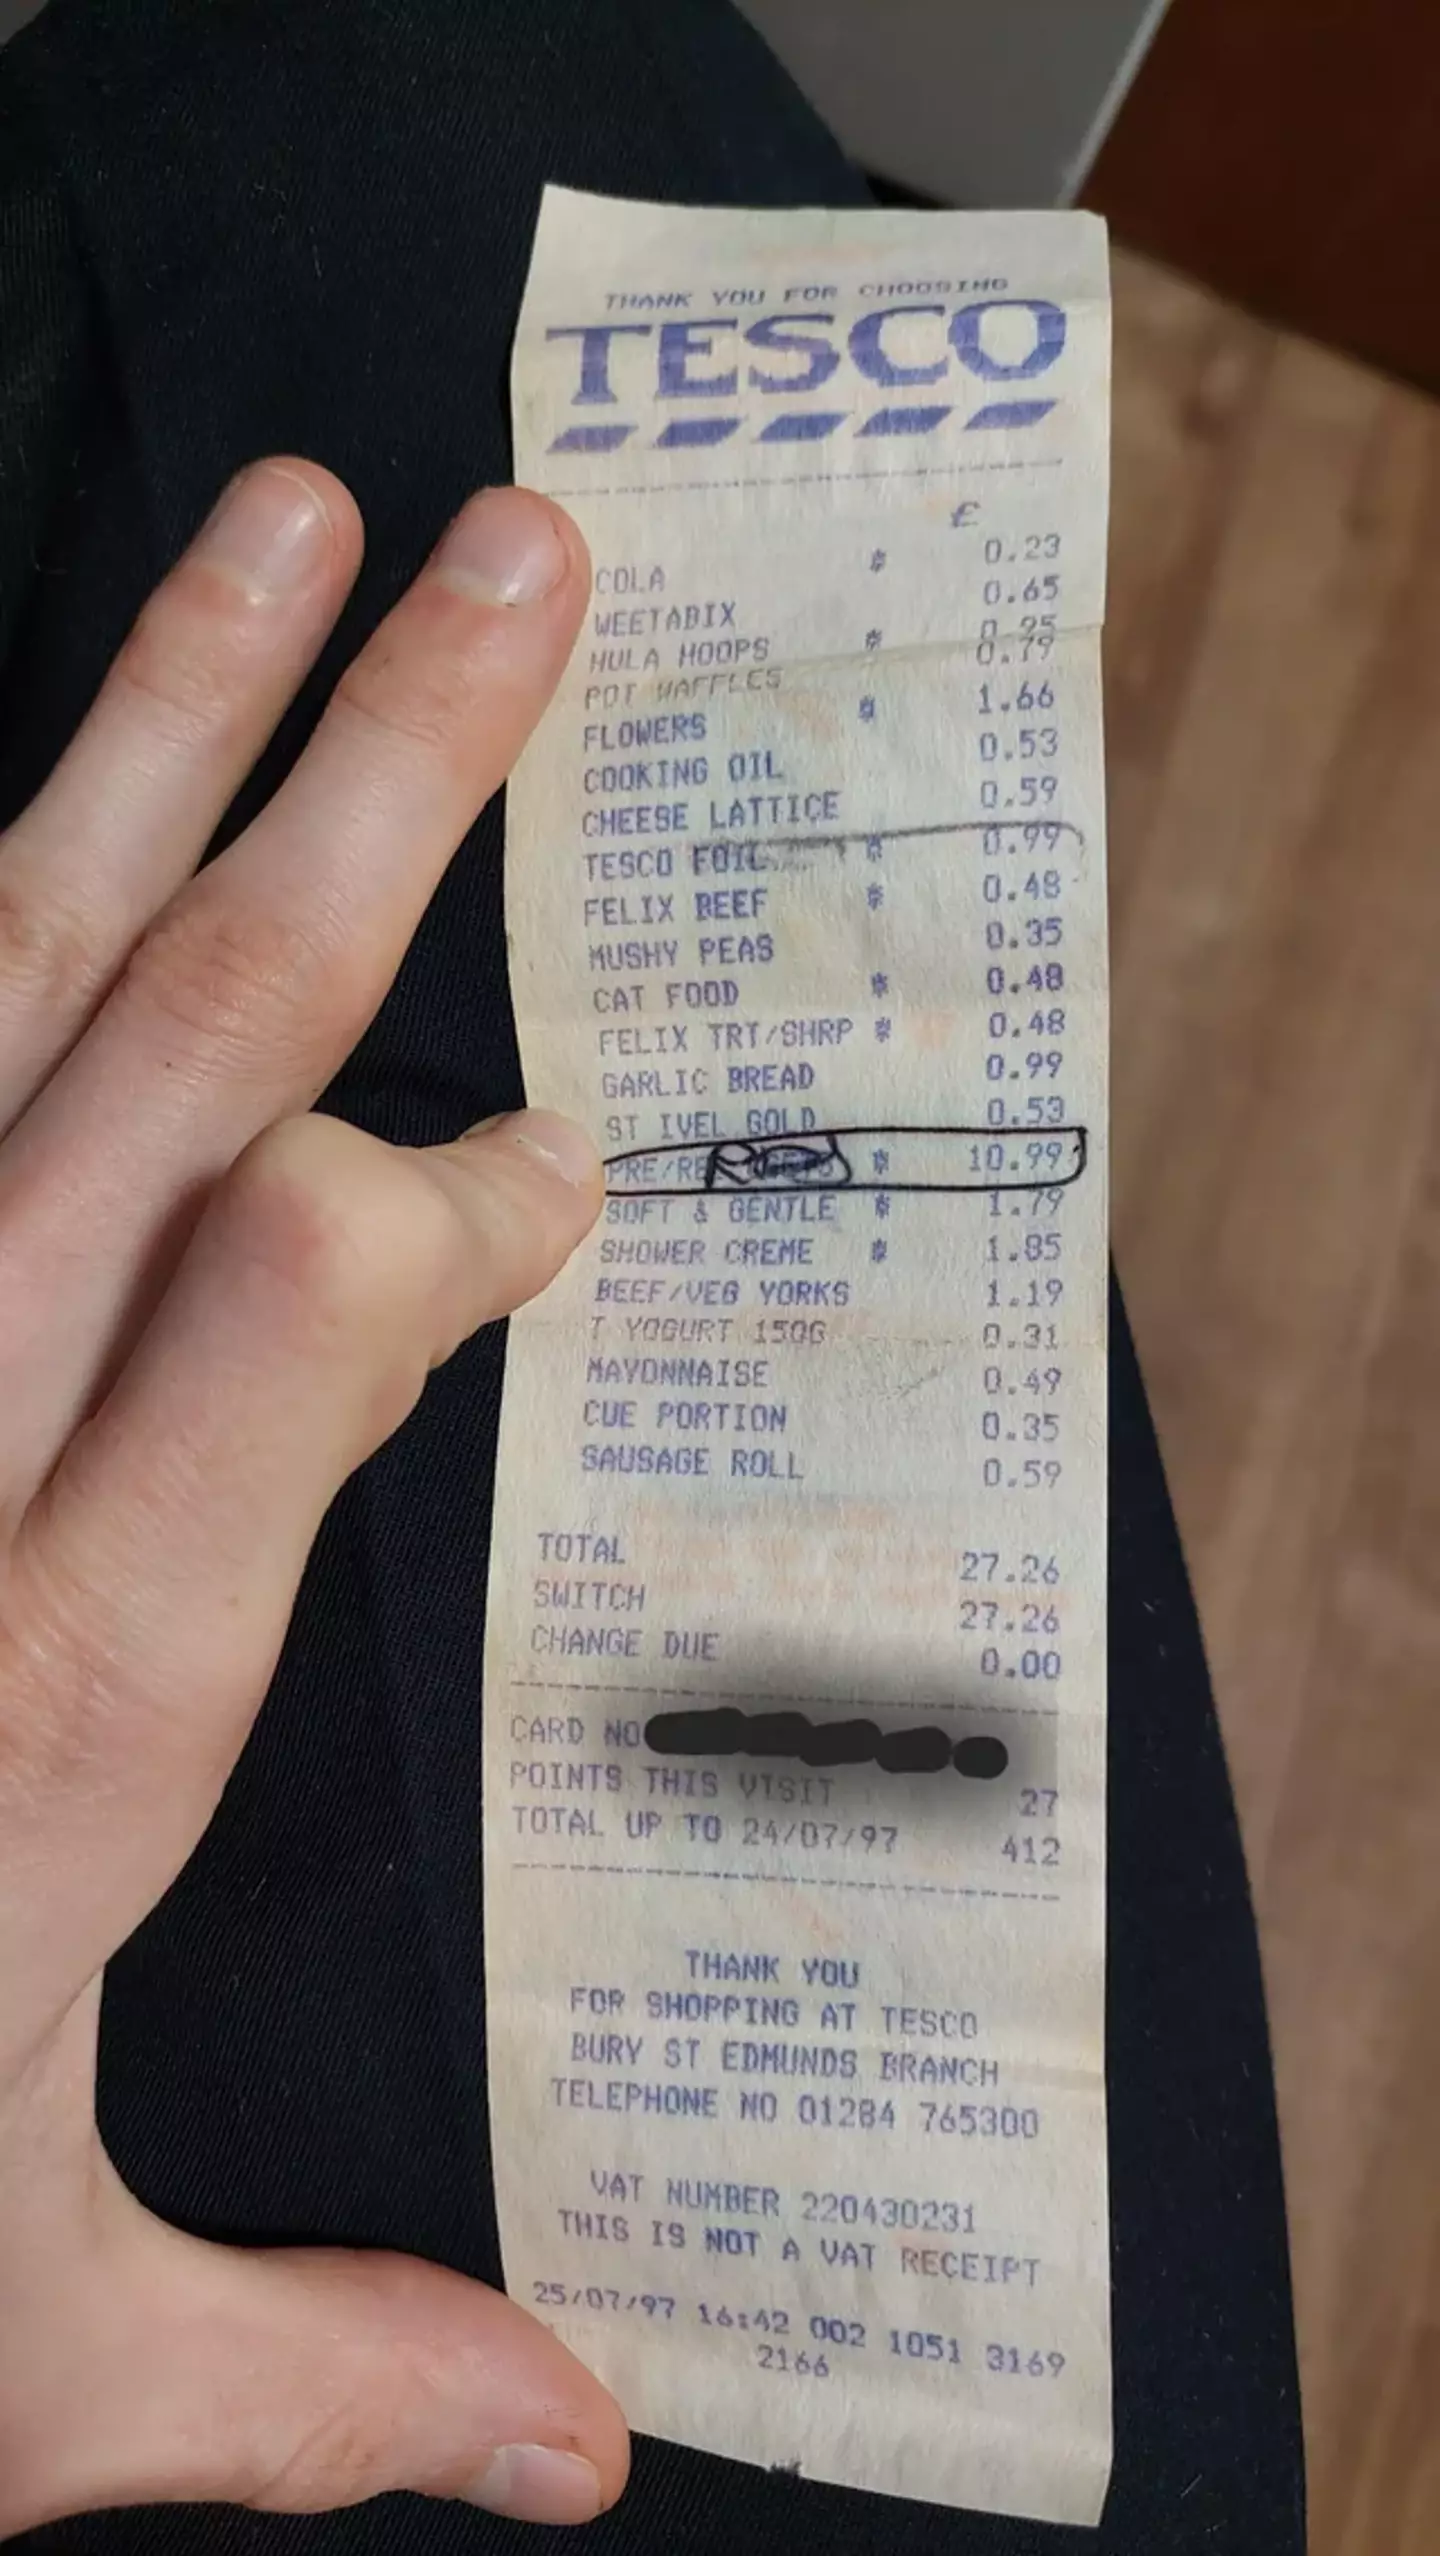 The extremely vintage Tesco receipt dating back to 1997.